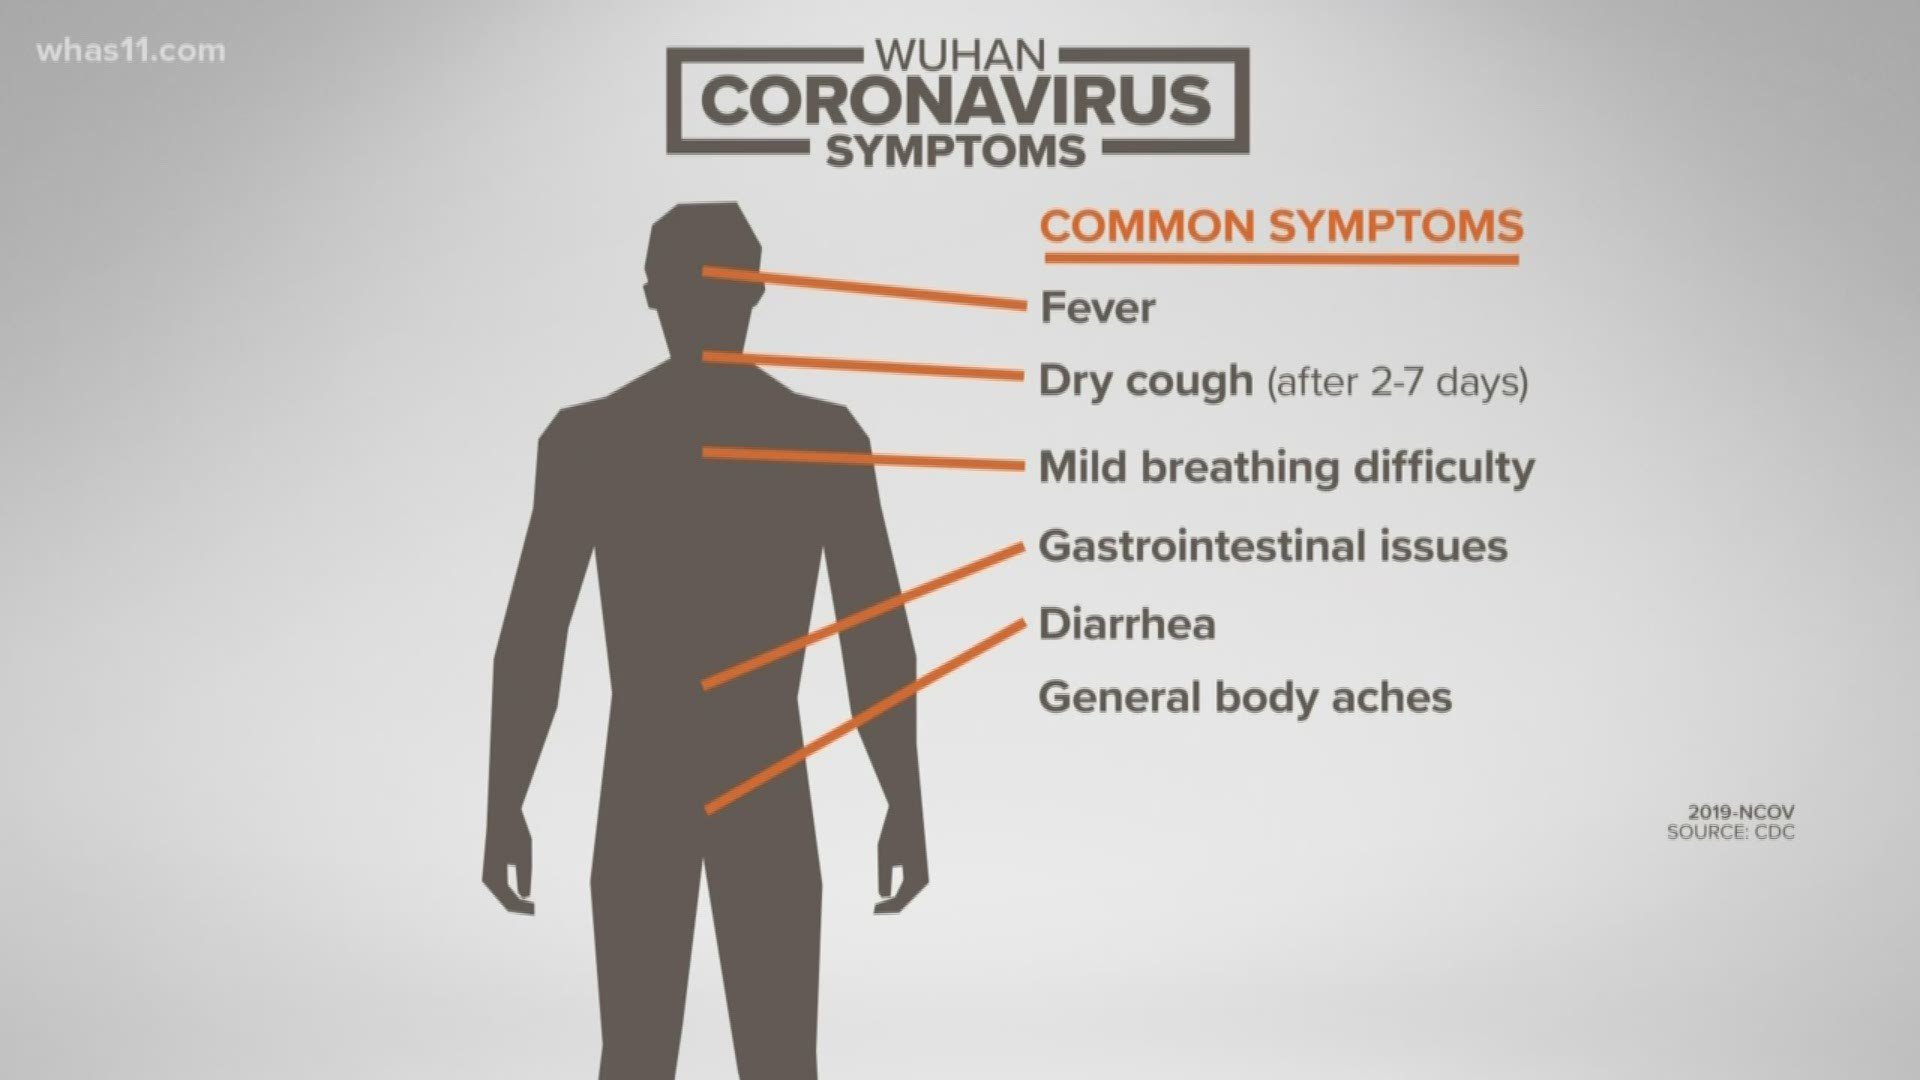 Dr. Forest Arnold said though the number of coronavirus cases continues to increase, Americans should not panic or fear.